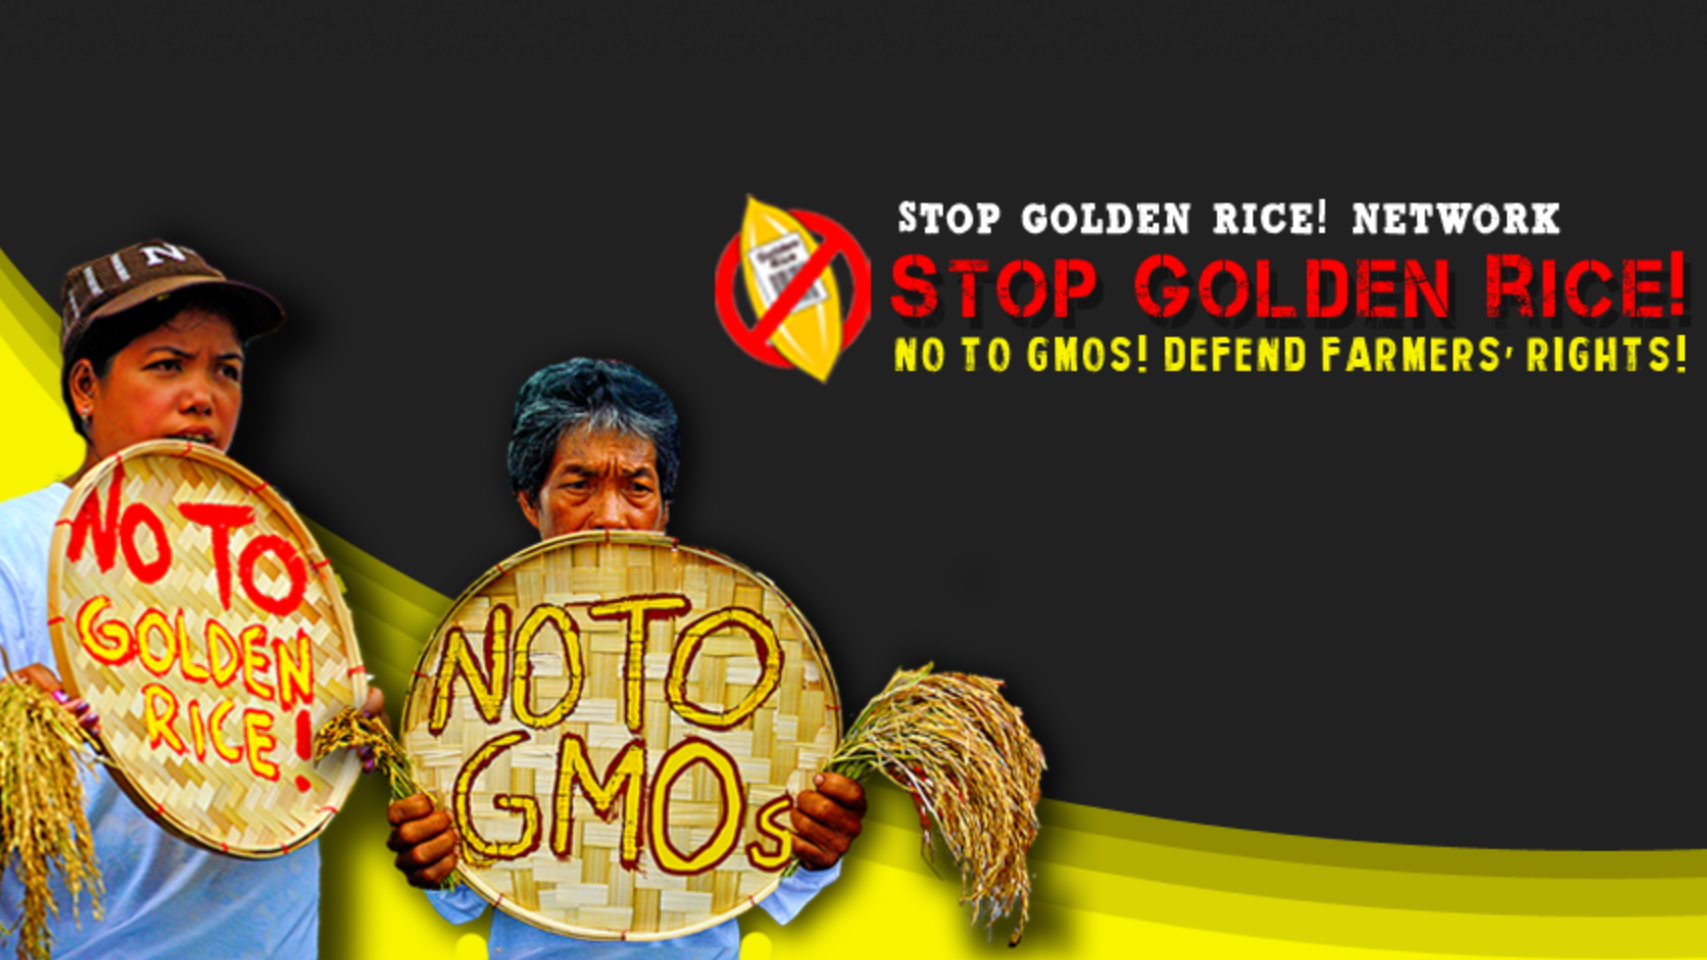 The picture is a campaign promotional graphic headed with some text saying “Stop Golden Rice! Network; Stop Golden Rice! No to GMOs! Defend Farmers Rights!” There is a logo depicting a single gold rice grain with a label on it saying “Golden Rice”) and a bar code, encircled with a prohibition sign. There are also 2 Indigenous farmers each holding a treshing basket and a clump of freshly harvested rice. One basket has text saying “No to Golden Rice” and the other has text saying “No to GMOs”.